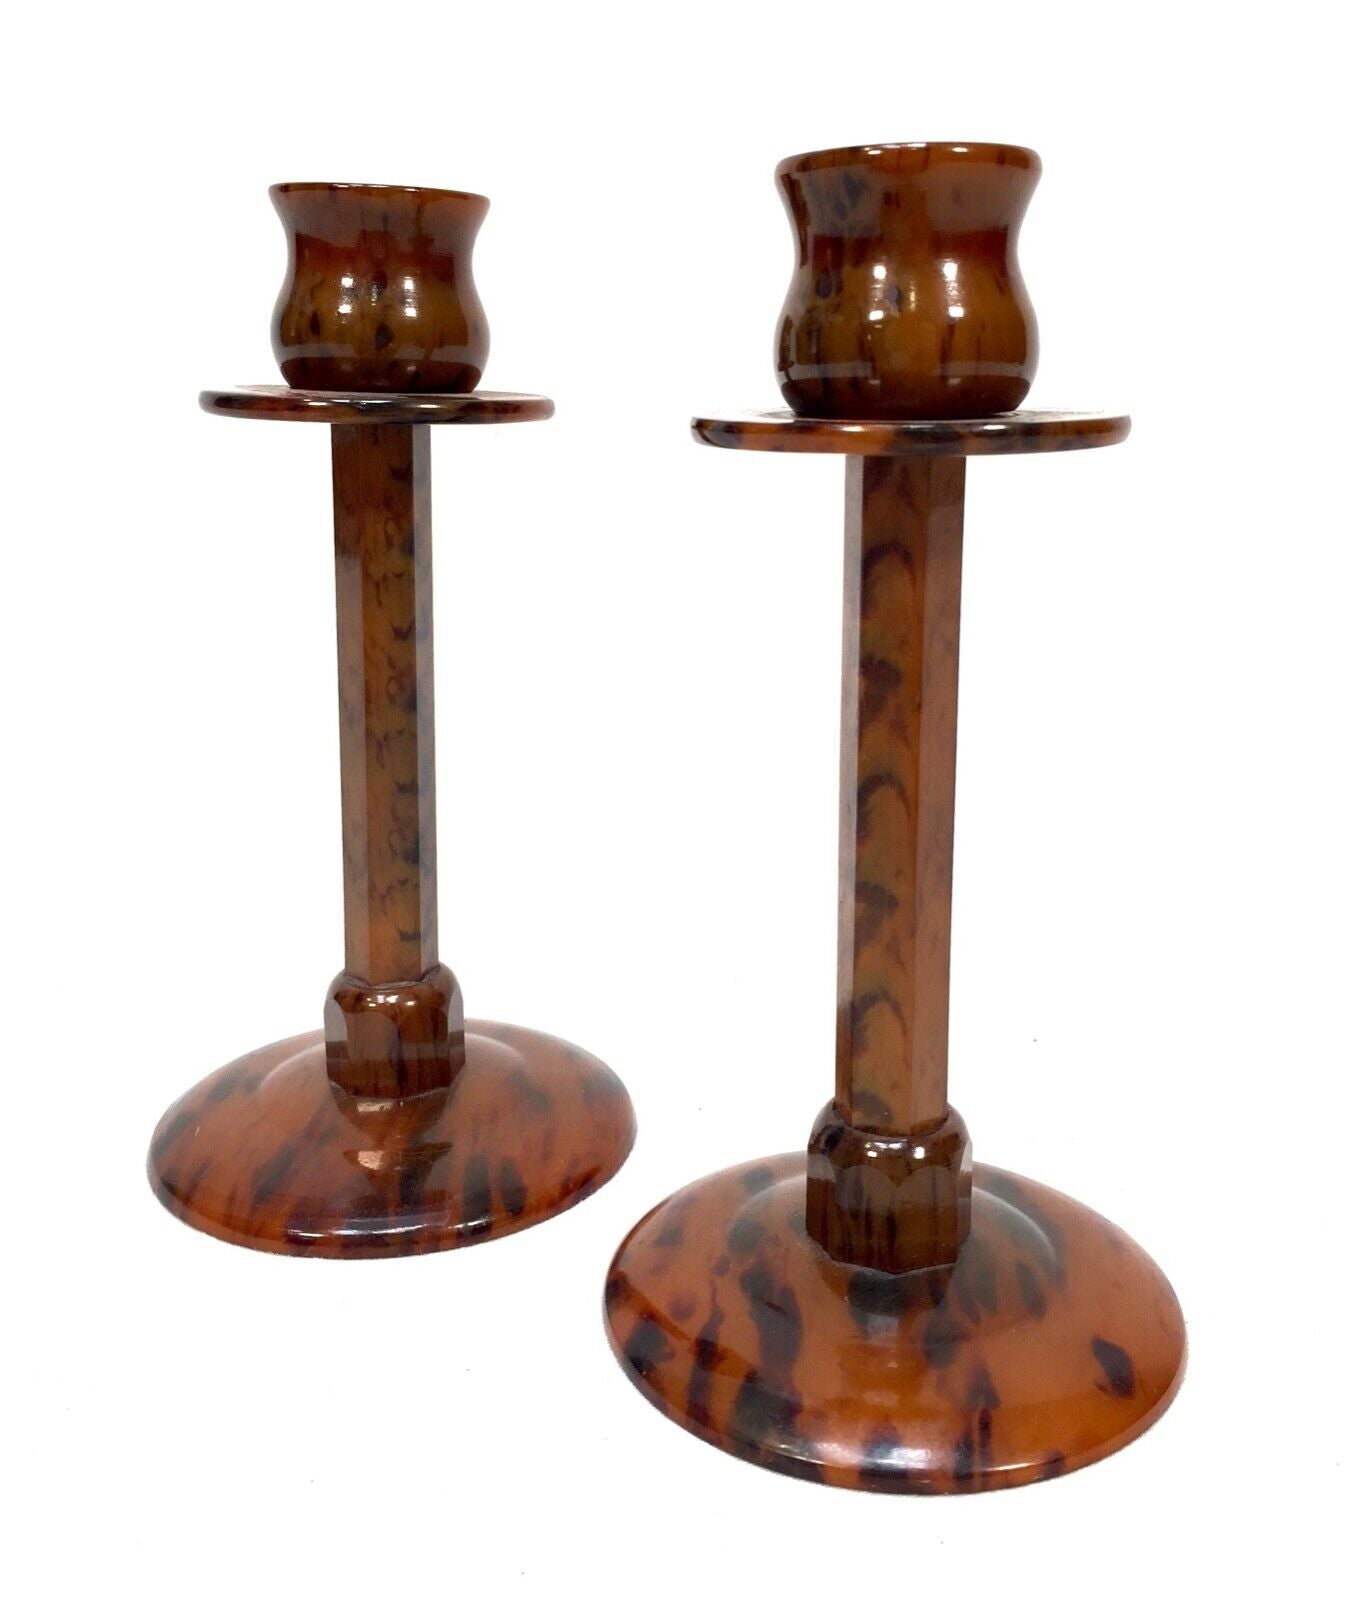 Vintage Pair of Matching Candlestick Holders / Retro / Faux Tortoise Shell 1970s